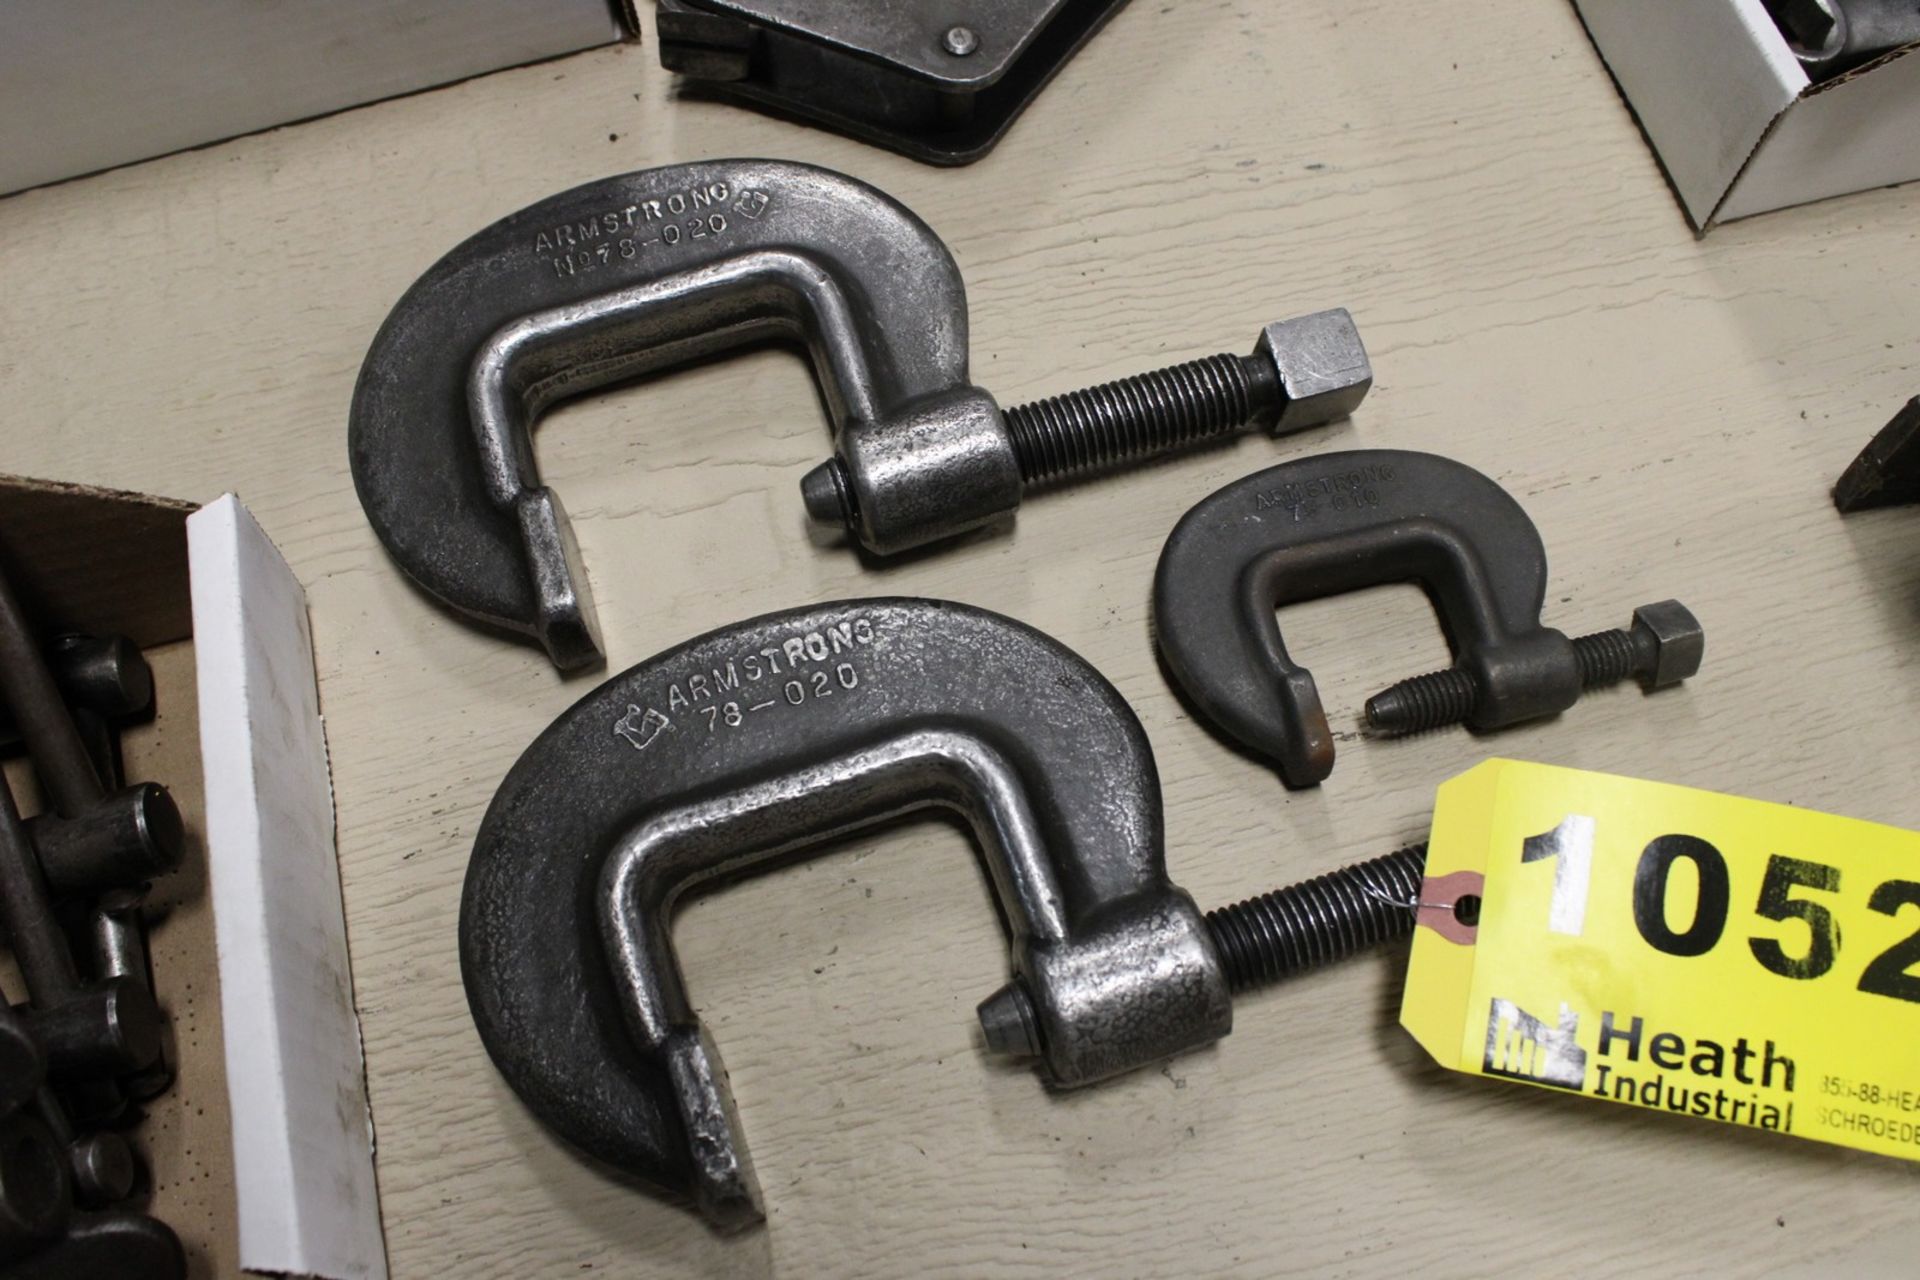 (3) ARMSTRONG WELDING CLAMPS